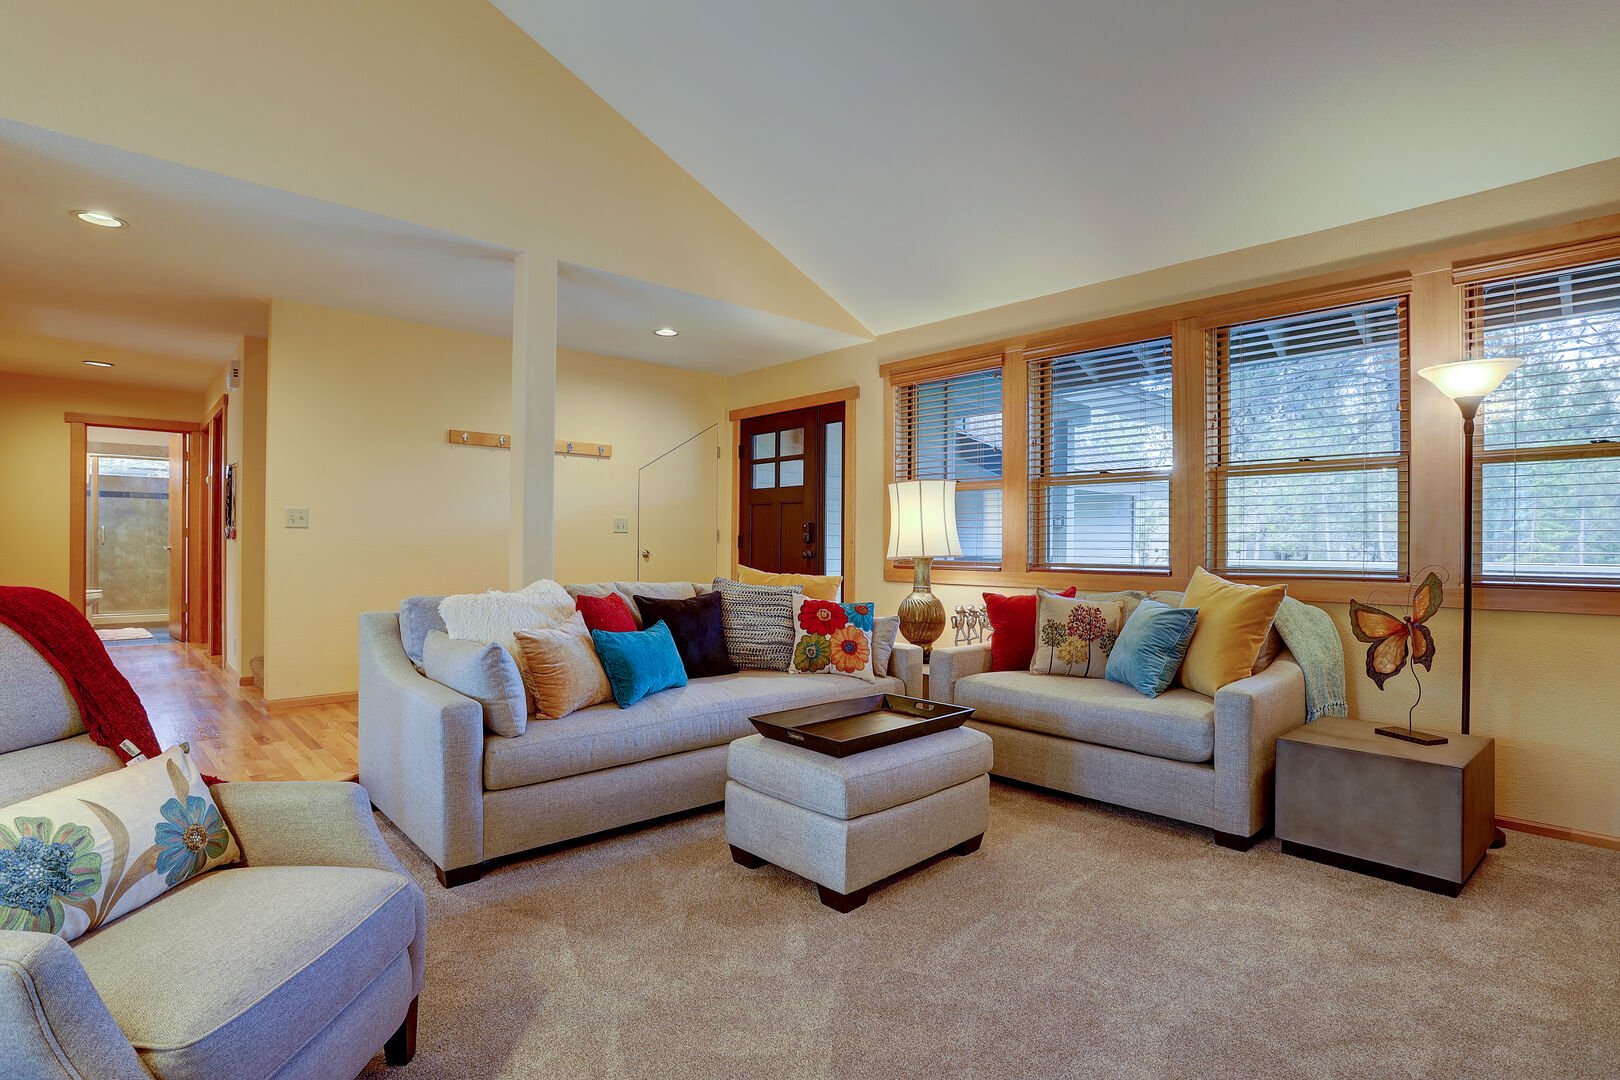 There is plenty of comfy seating to enjoy the gas fireplace or watch TV.